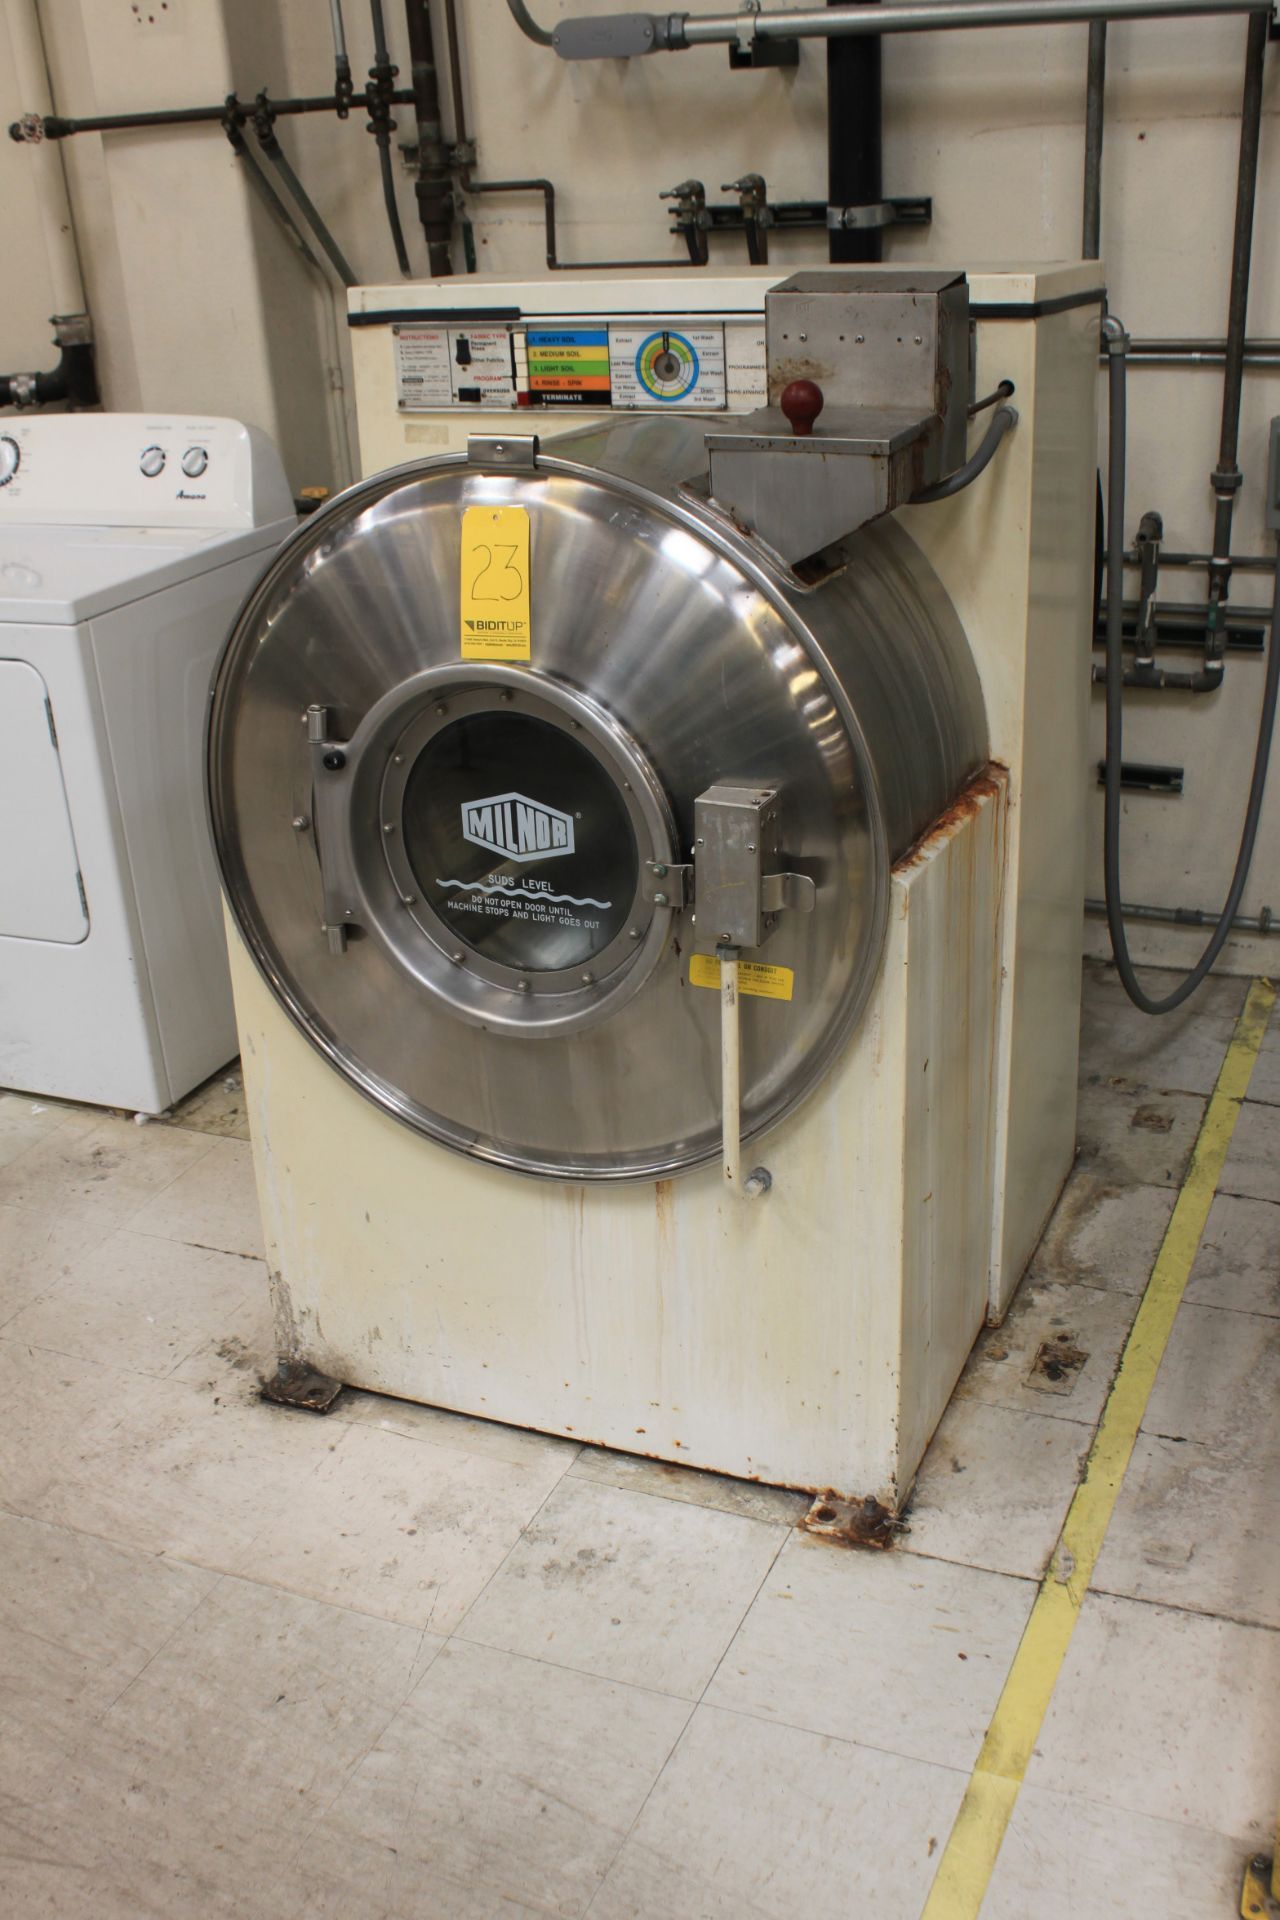 (1977) Milnor Washer, Model 30015N4E, 35 Lb. Max Load, 445 Max RPM, S/N 3228202/78236 - Image 2 of 4